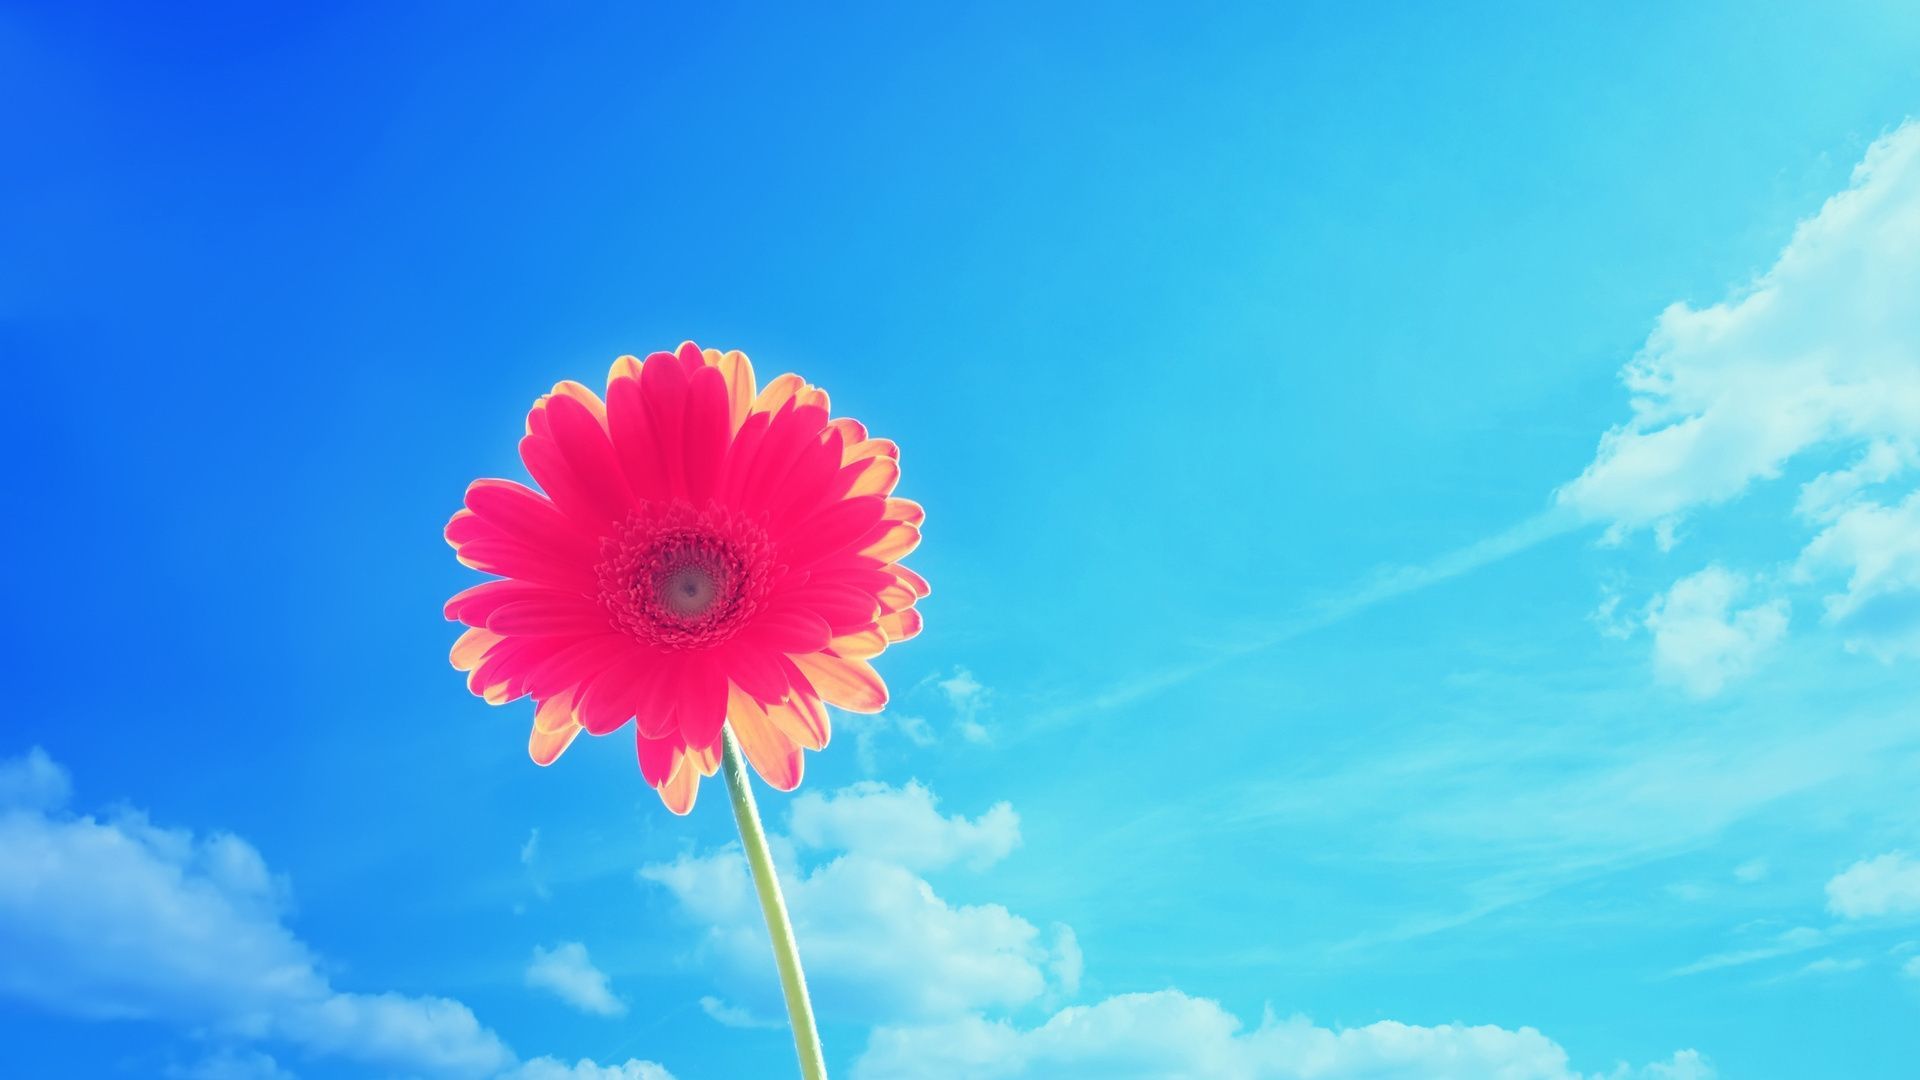 Pink gerbera in a sunny day Wallpaper 28208